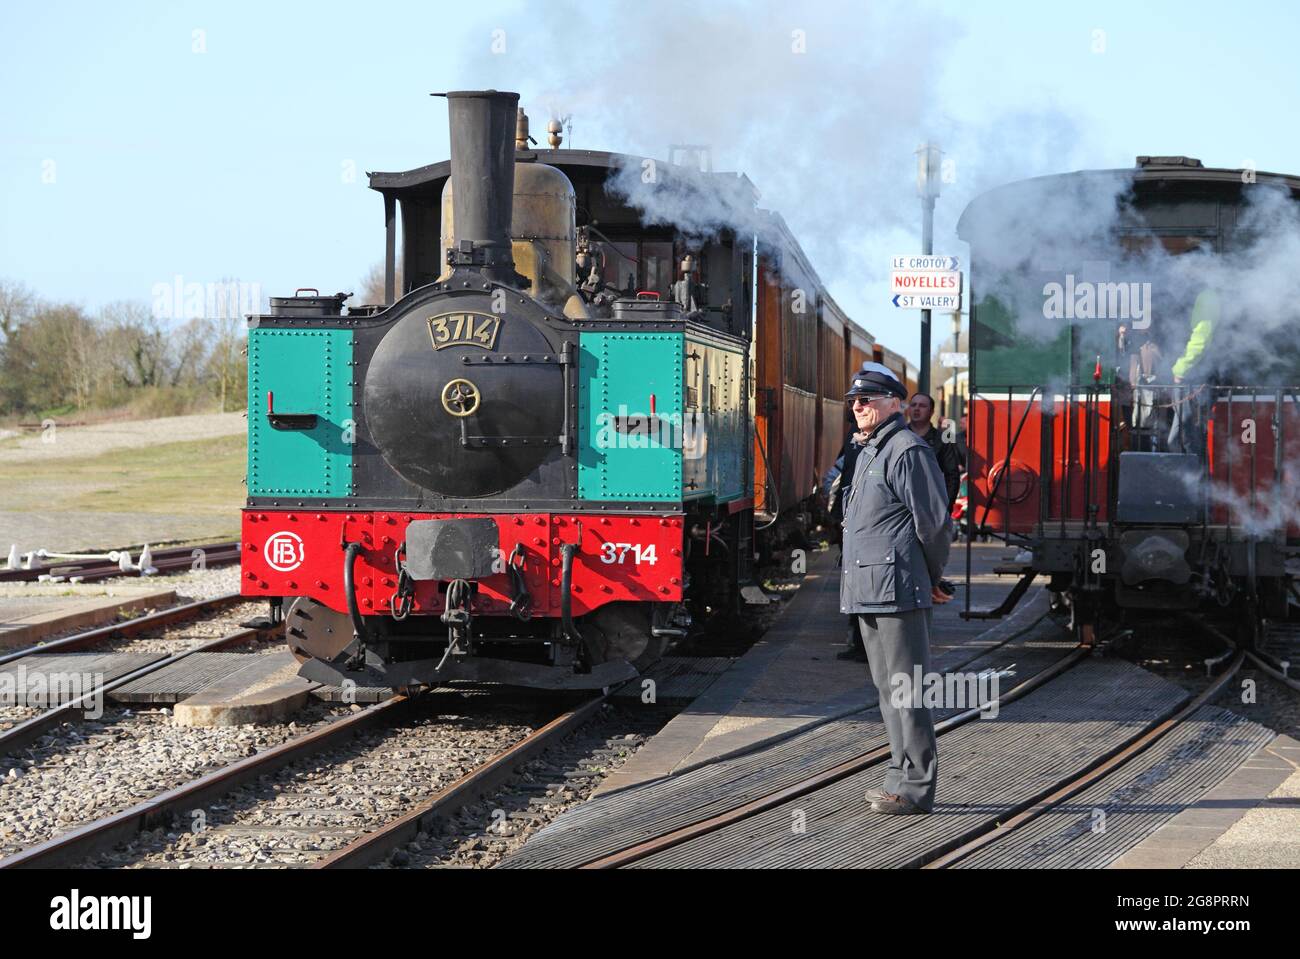 St Valery-sur-Somme Steam train, Picardy, France Stock Photo